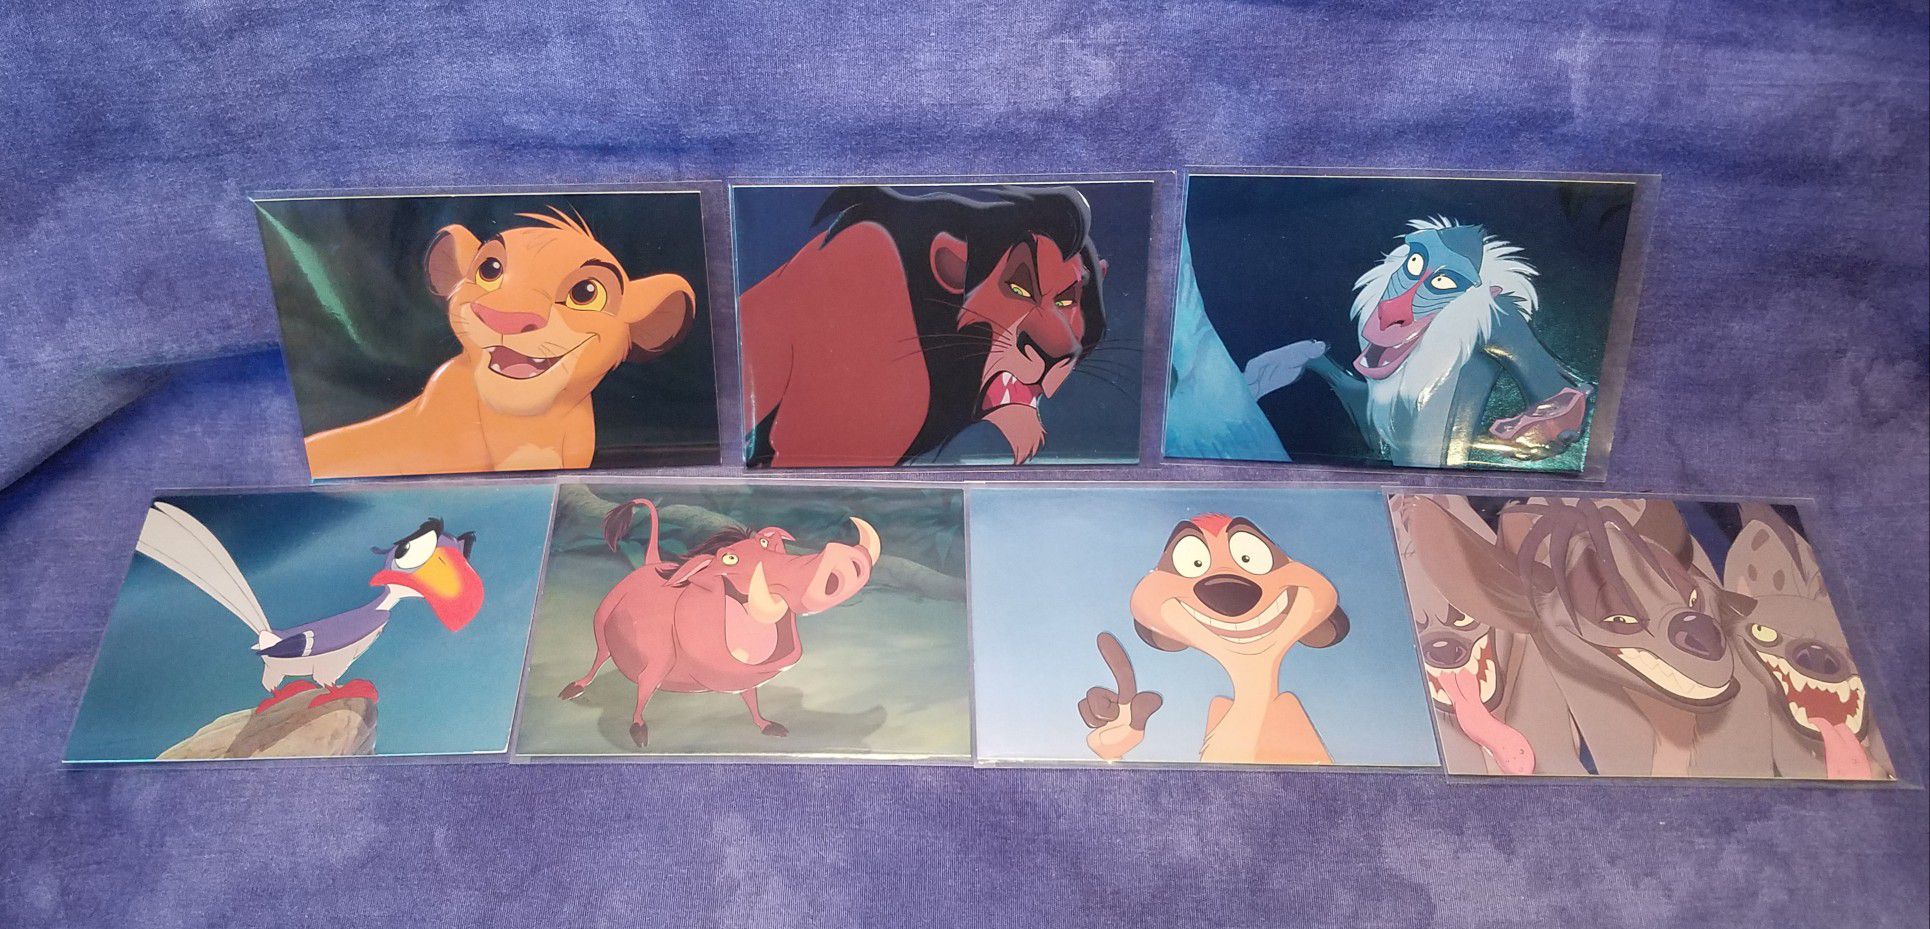 1994 Skybox Walt Disney The Lion King Bonus Foil Embossed Cards - Pick The Ones You Want To Complete Your Set